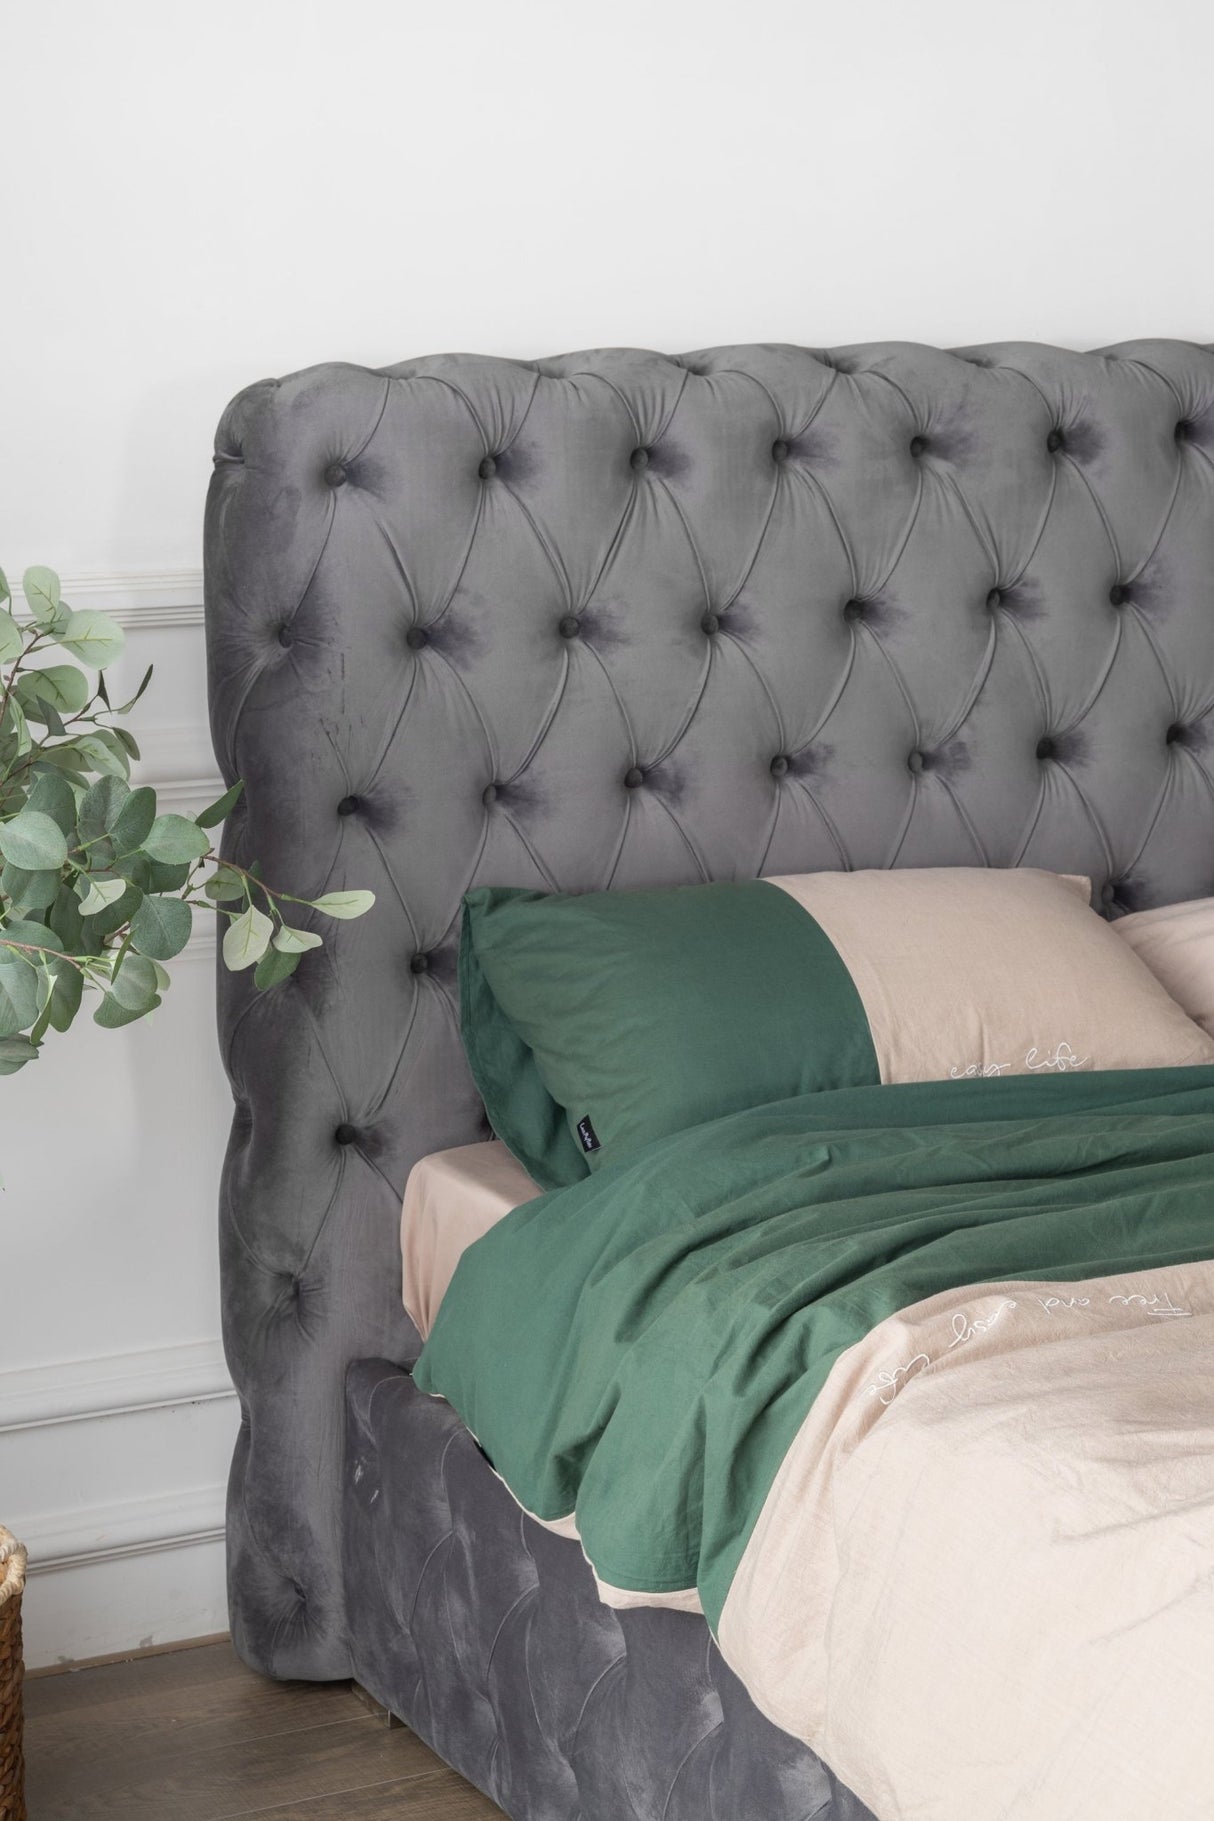 3585QUEEN BED Beautiful line stripe cushion headboard,Portable pneumatic connection rod+Grey Flannelette - Home Elegance USA